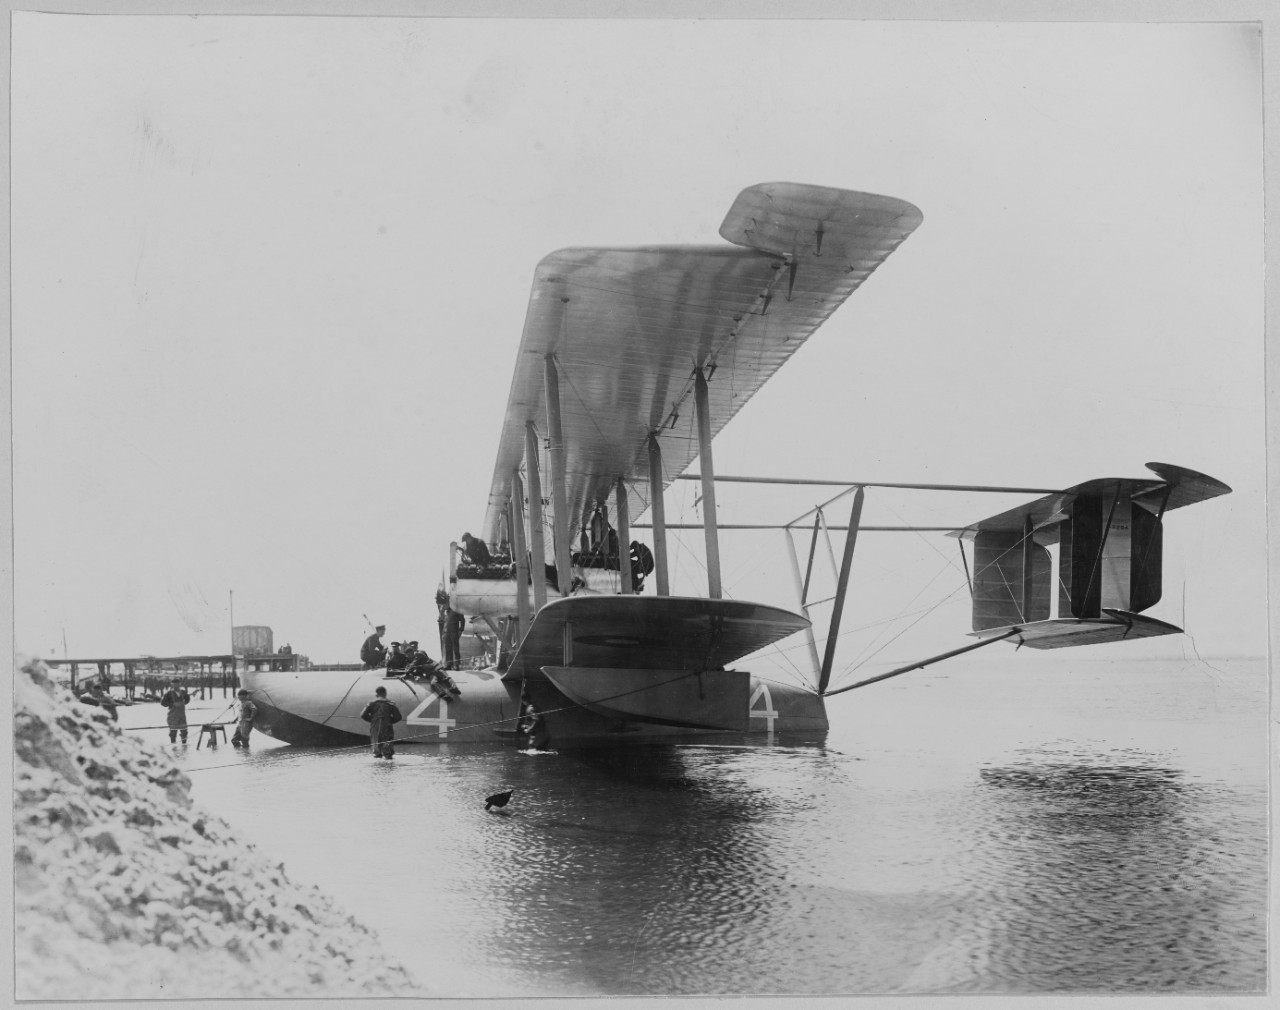 NC-4, giant seaplane which made trans-Atlantic flight